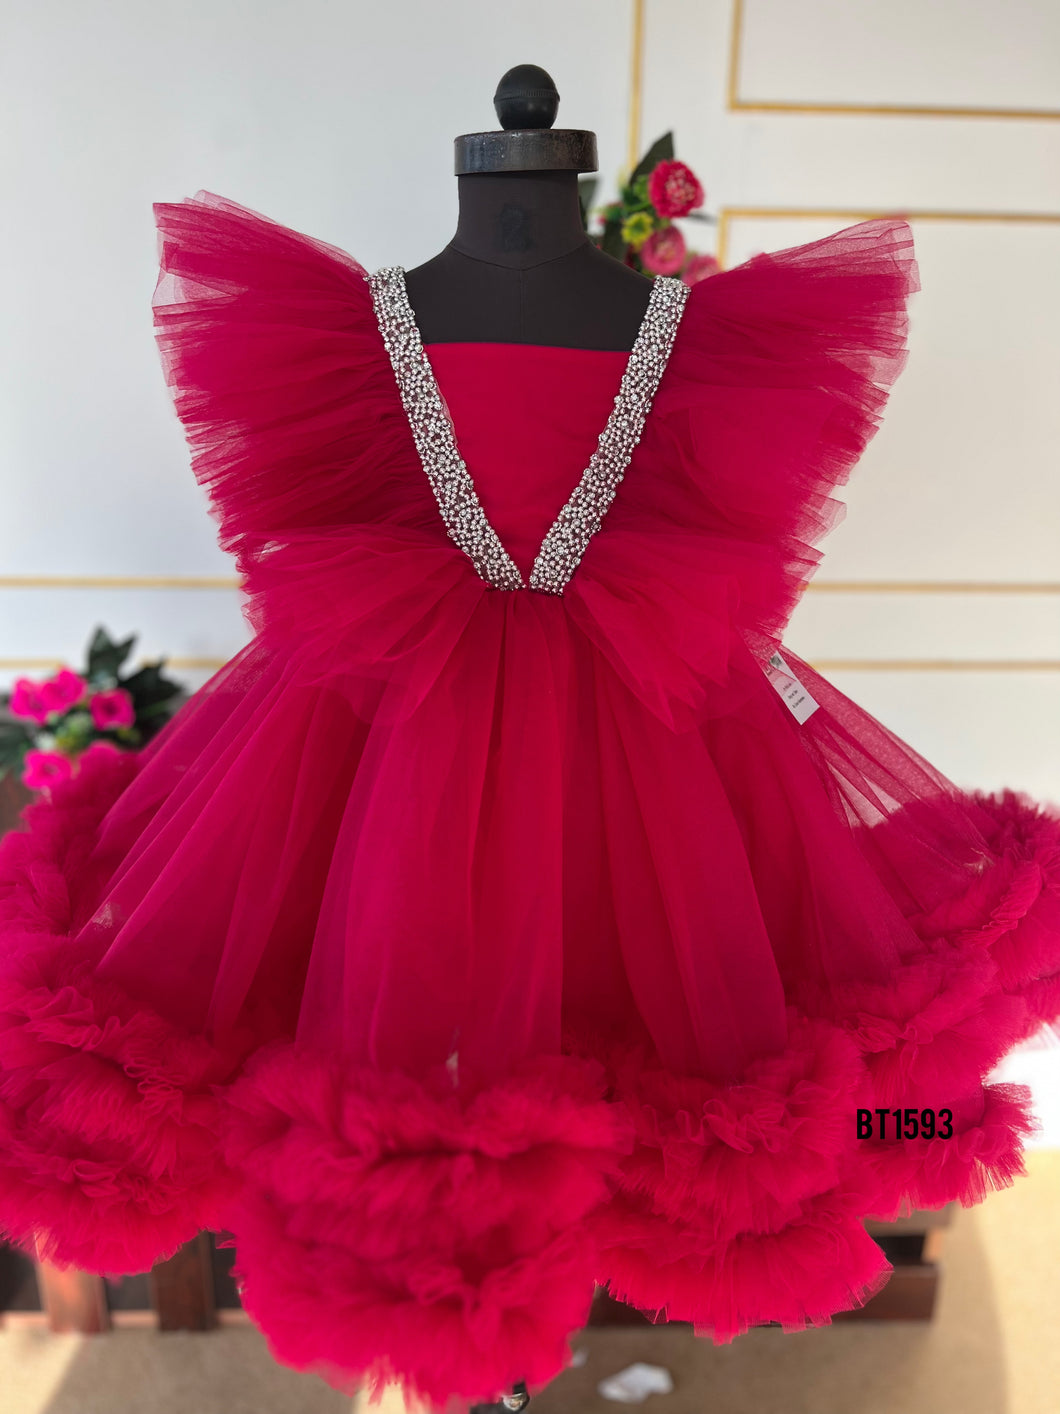 BT1593 Ruby Radiance: Your Little Gem's Perfect Party Dress